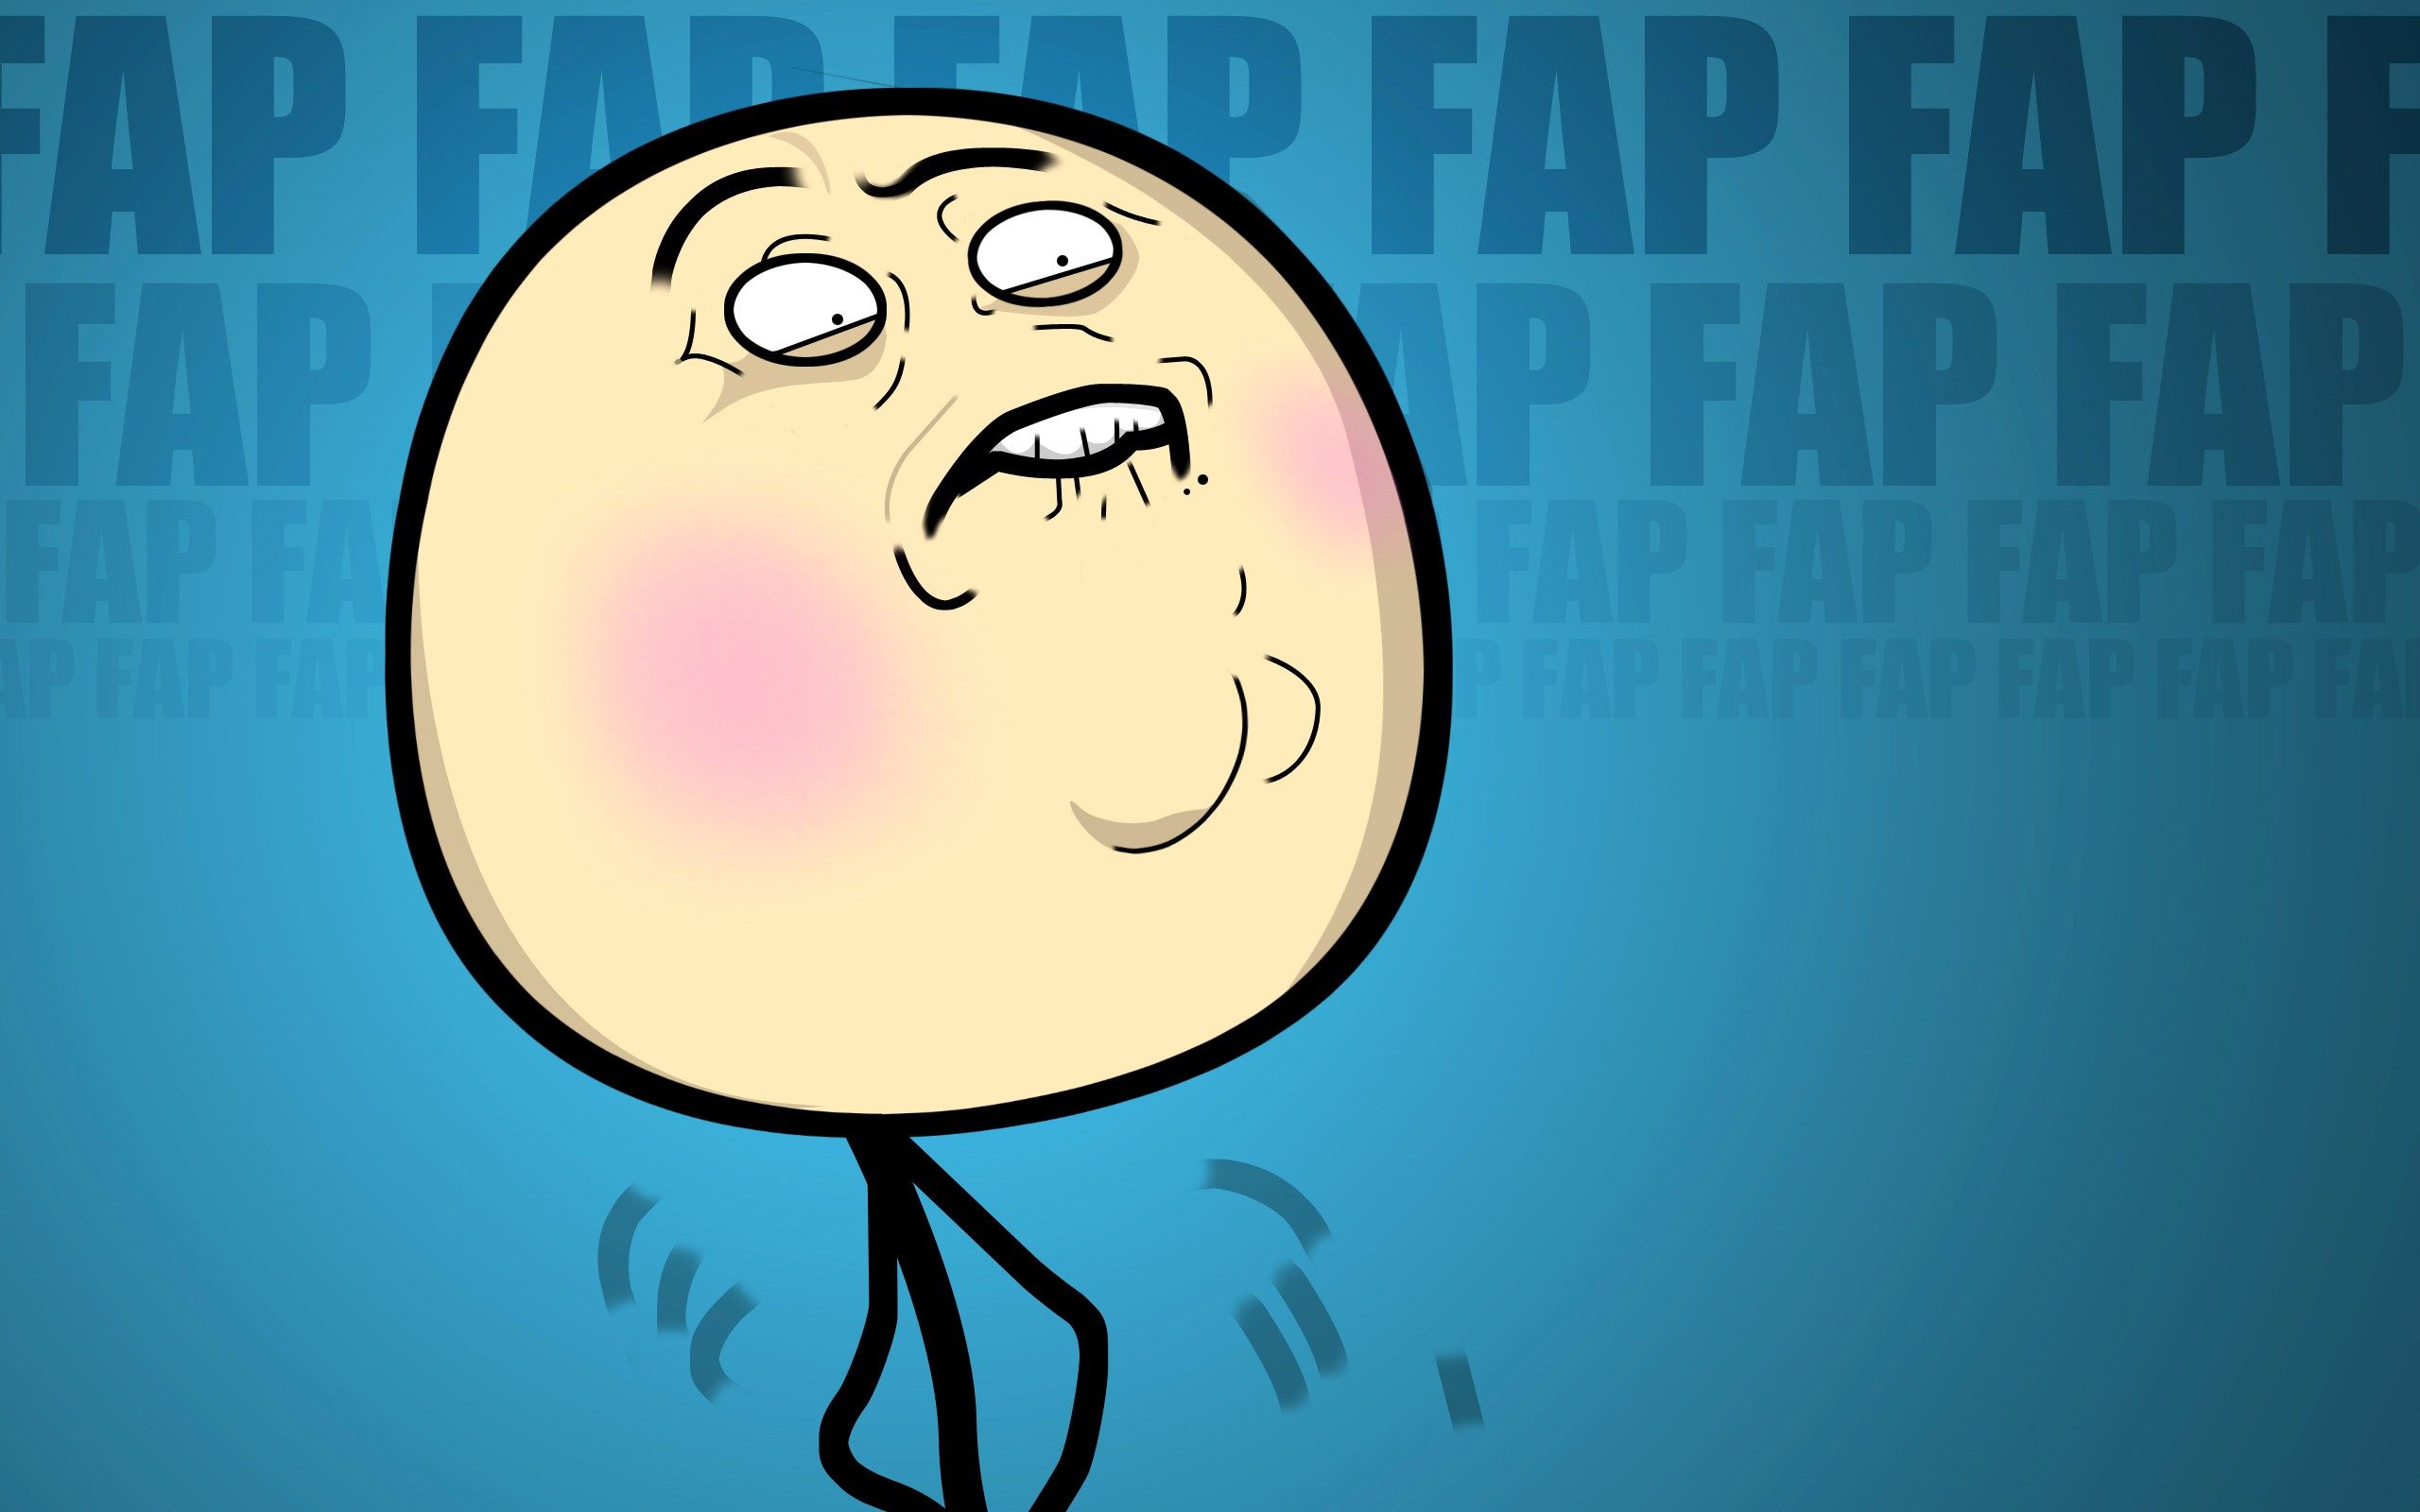 Funny Meme Faces Wallpapers